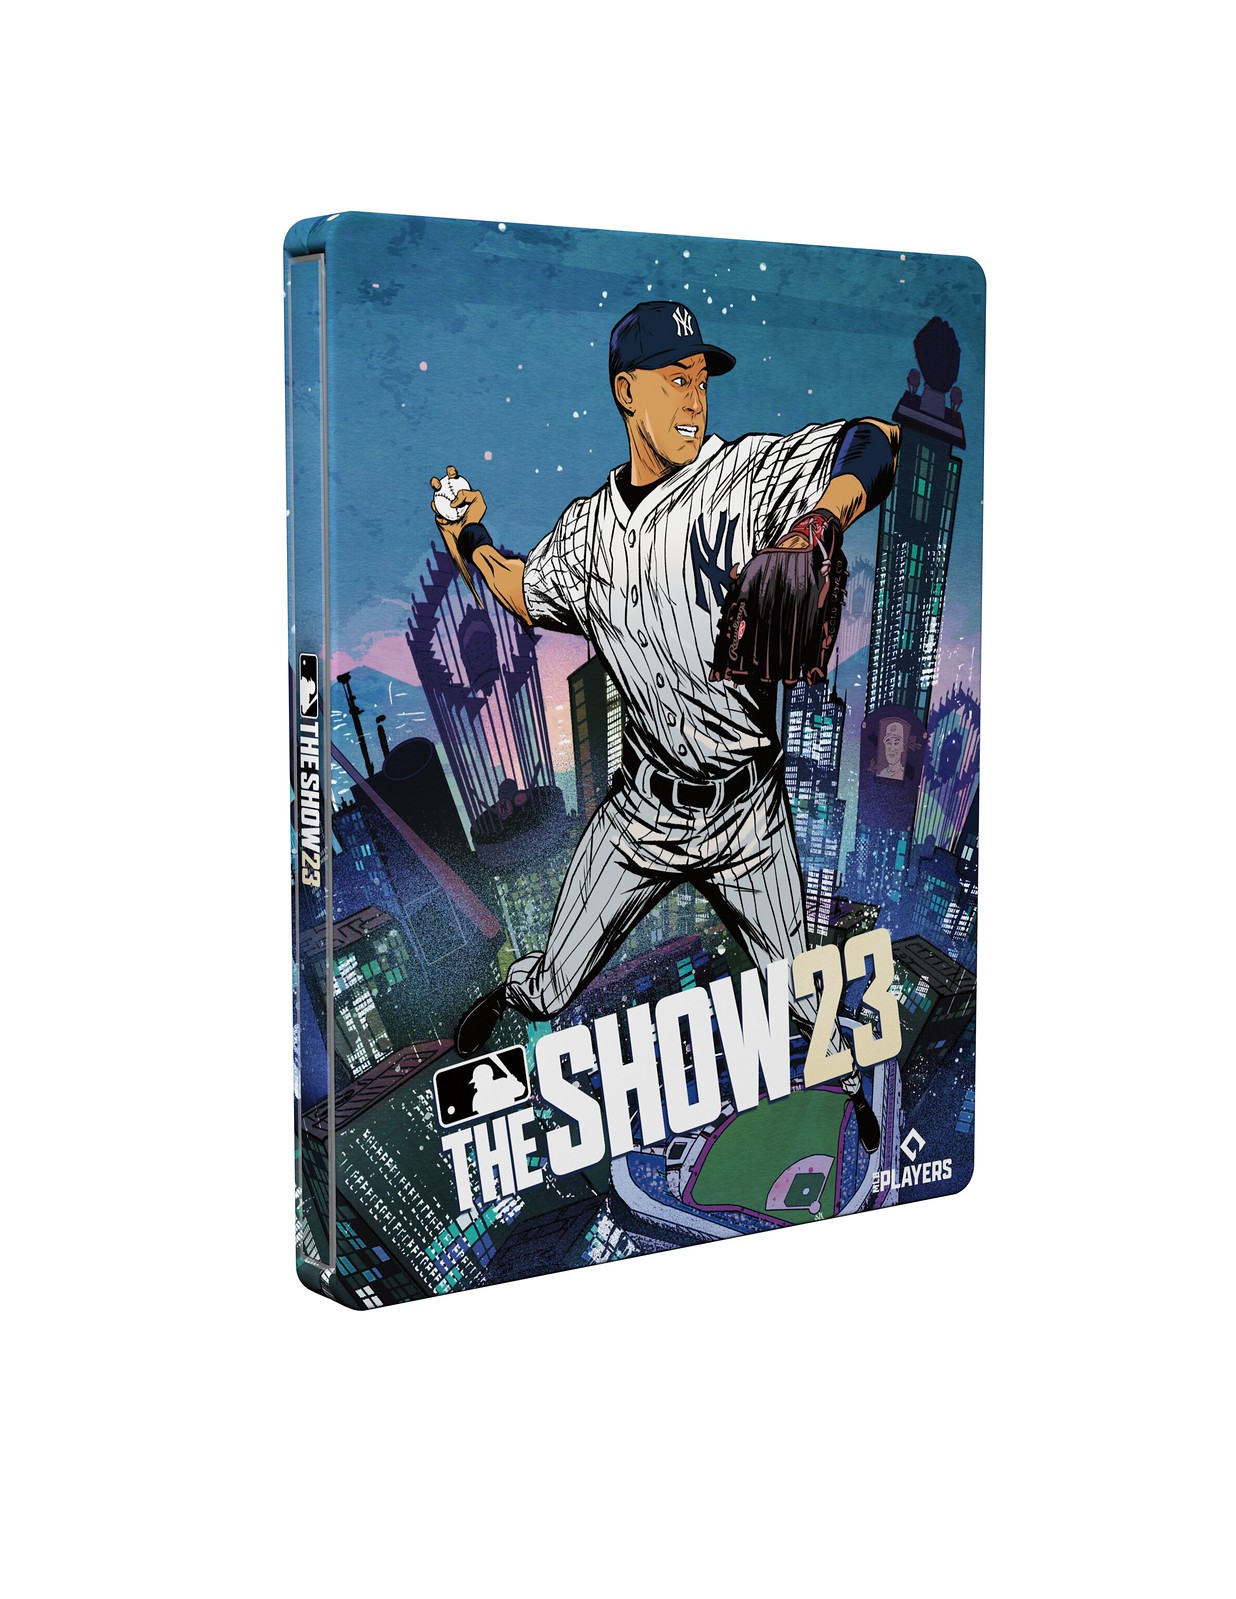 Yankees legend Derek Jeter is your MLB The Show 23 Collector’s Edition cover athlete 1